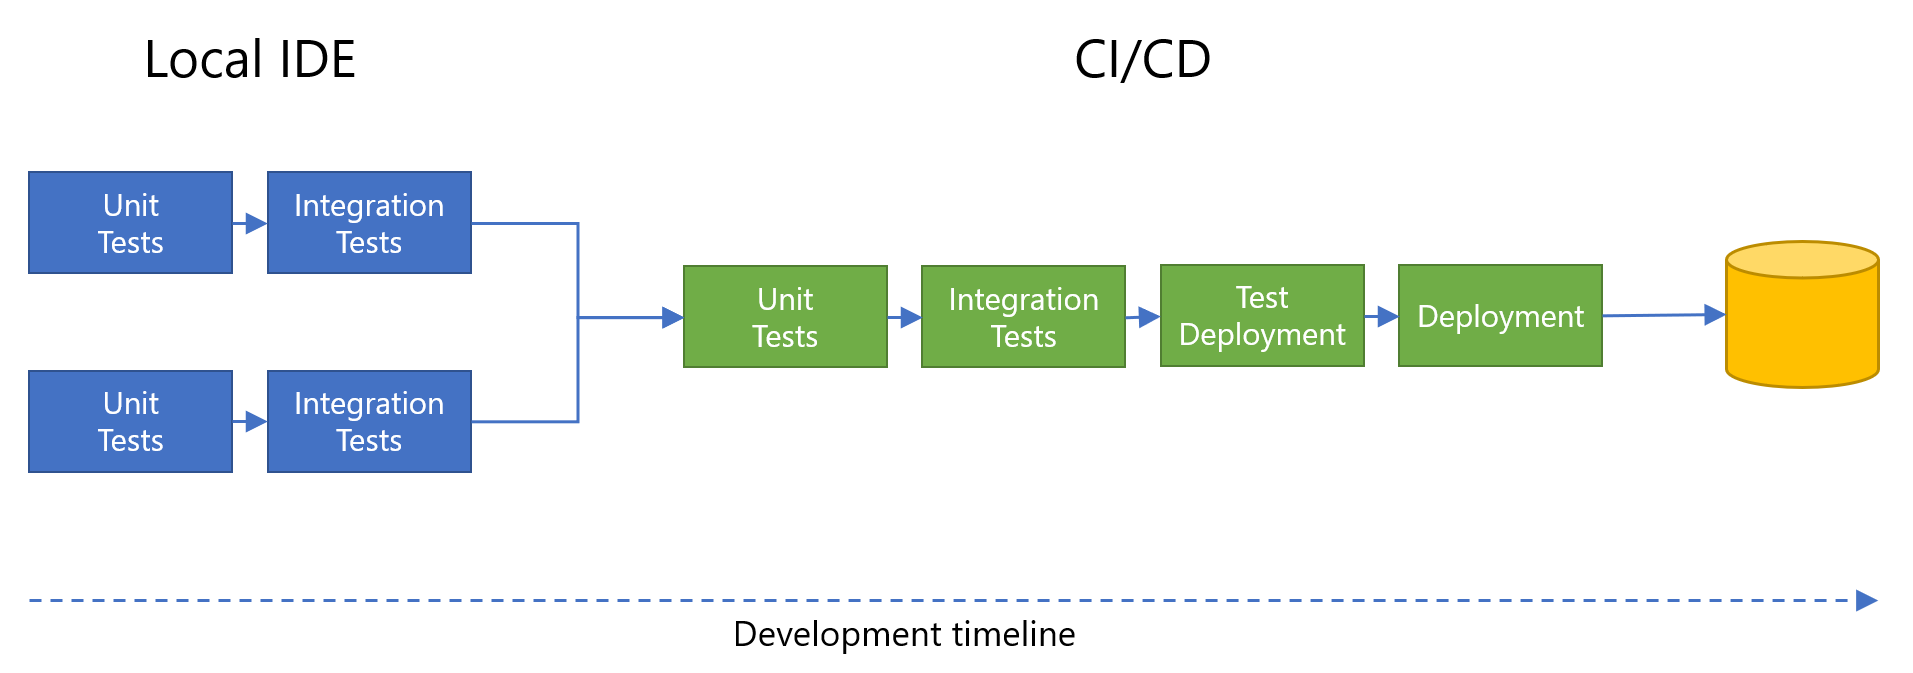 Diagram showing parallel unit tests and integration tests in local IDEs, merging into CI/CD development flow with unit tests, integration tests, test deployment, and final deployment.